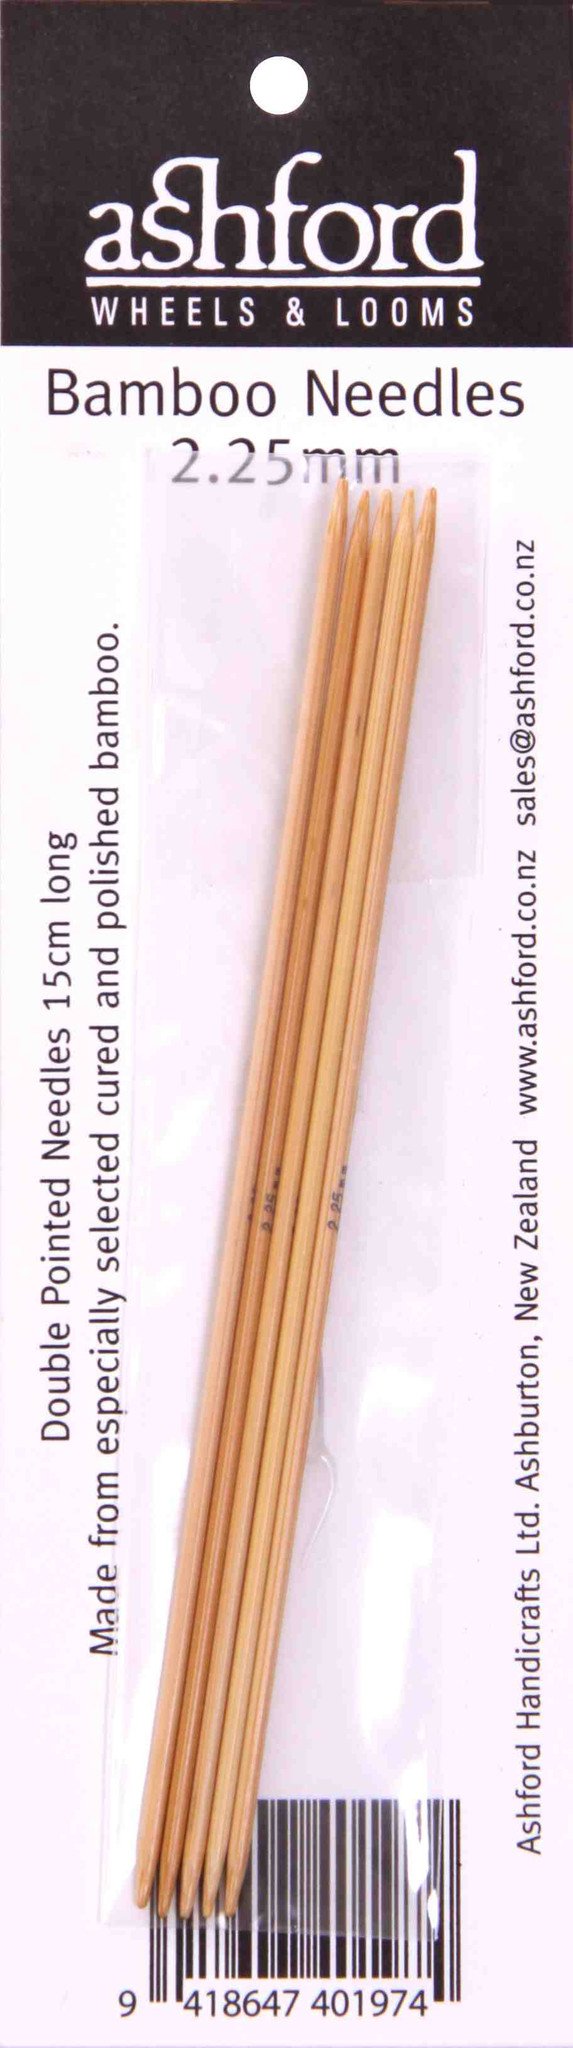 Ashford Bamboo Double Pointed Needles